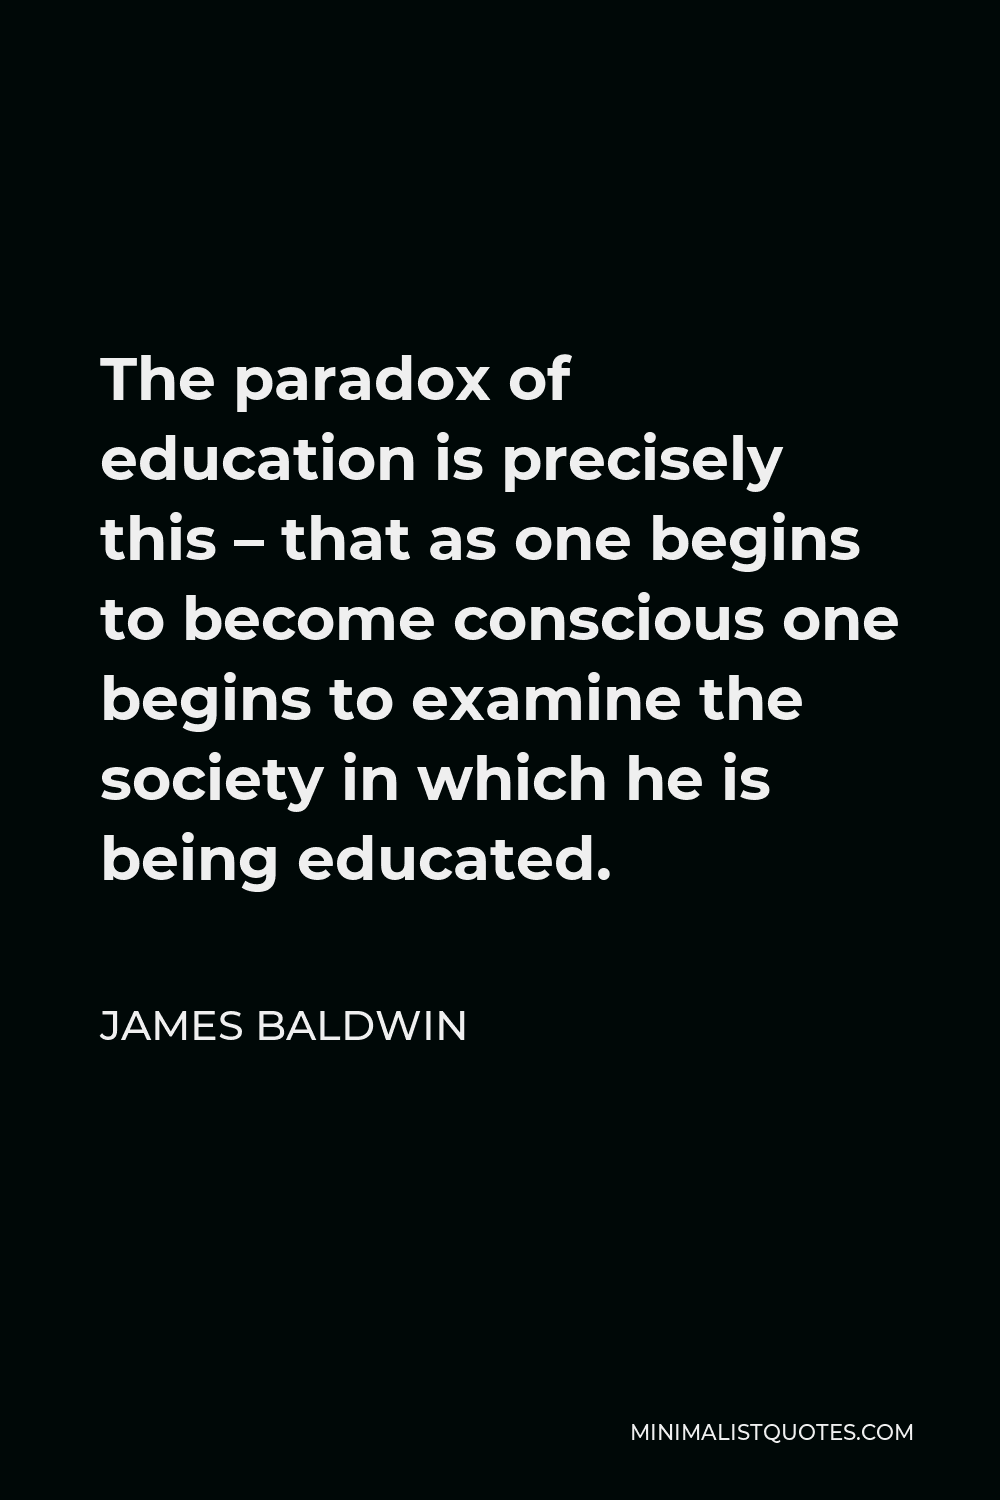 James Baldwin Quote - The paradox of education is precisely this – that as one begins to become conscious one begins to examine the society in which he is being educated.